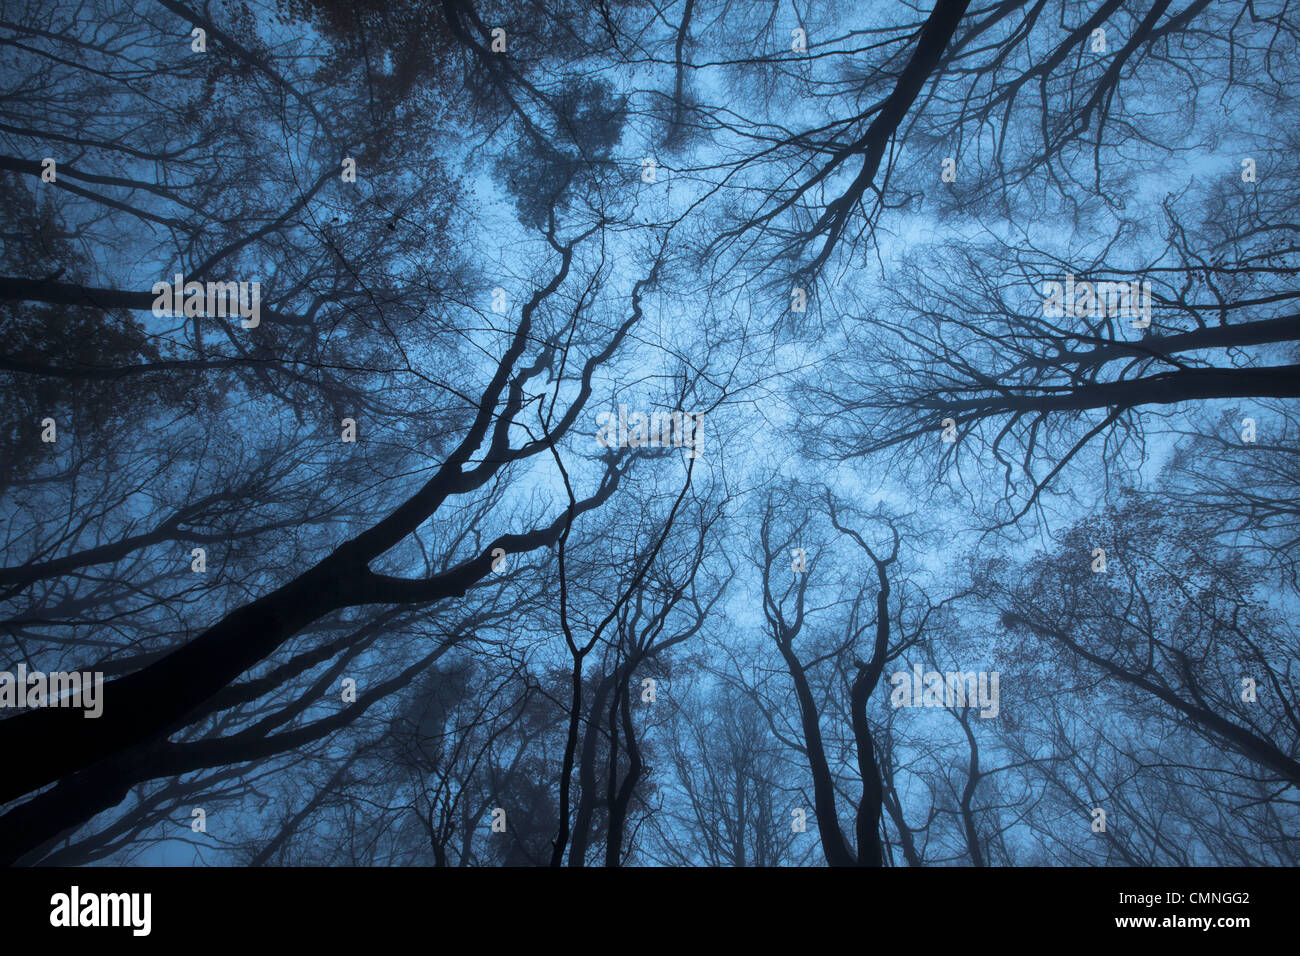 Looking up through a Beech wood canopy (Fagus sylvatica) in winter, Peak District National Park, Derbyshire, UK. Stock Photo